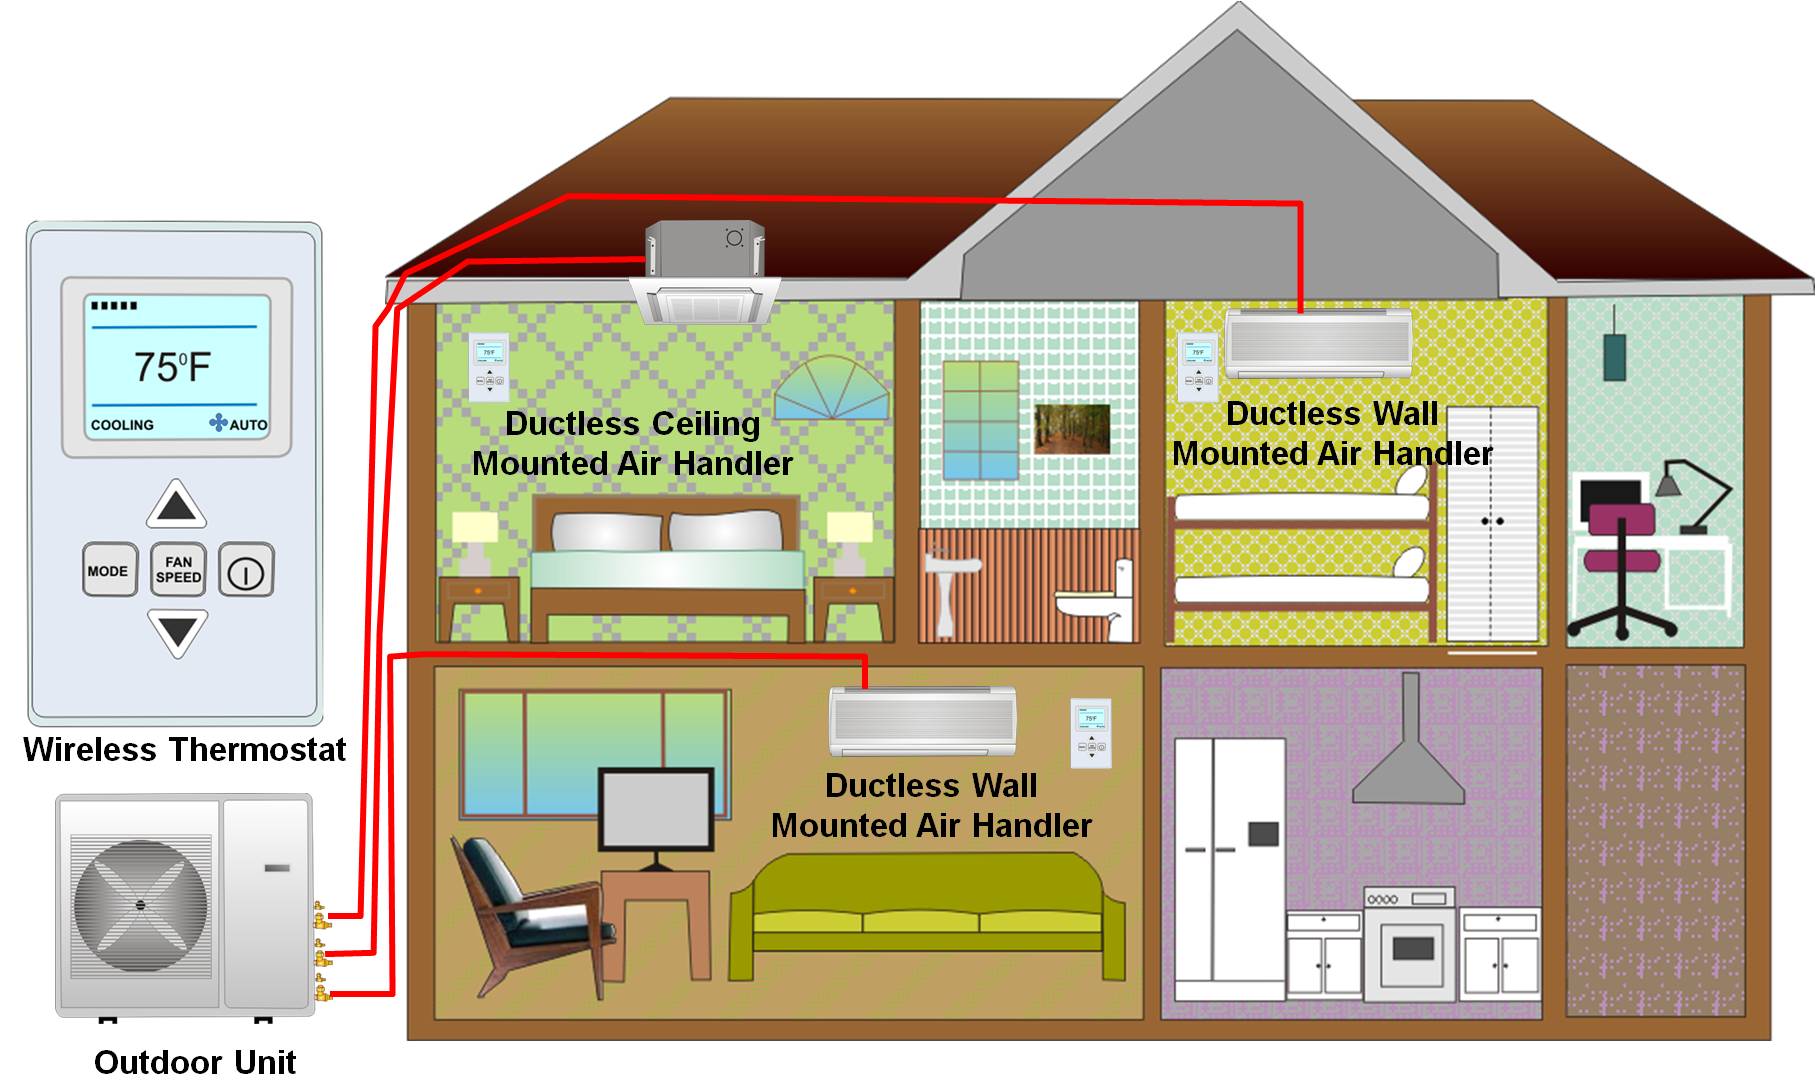 three-zone-ductless-mini-split-system-consisting-of-two-wall-mounted